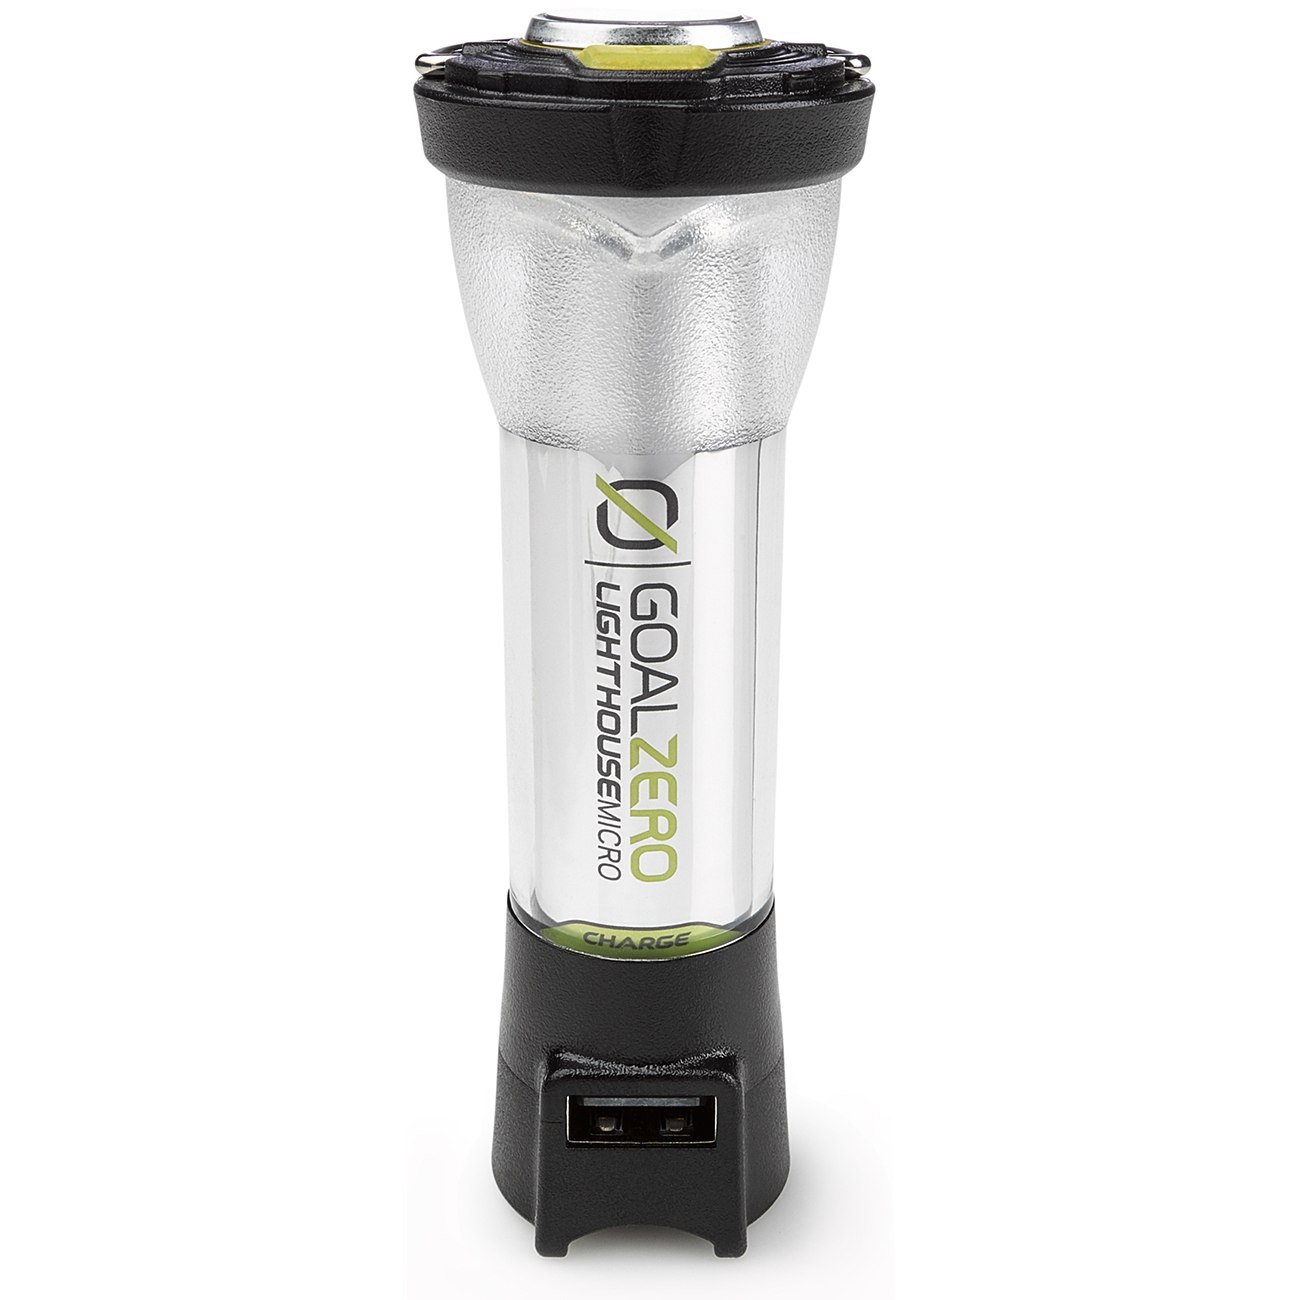 Produktbild von Goal Zero Lighthouse Micro Charge USB Rechargeable LED Lampe